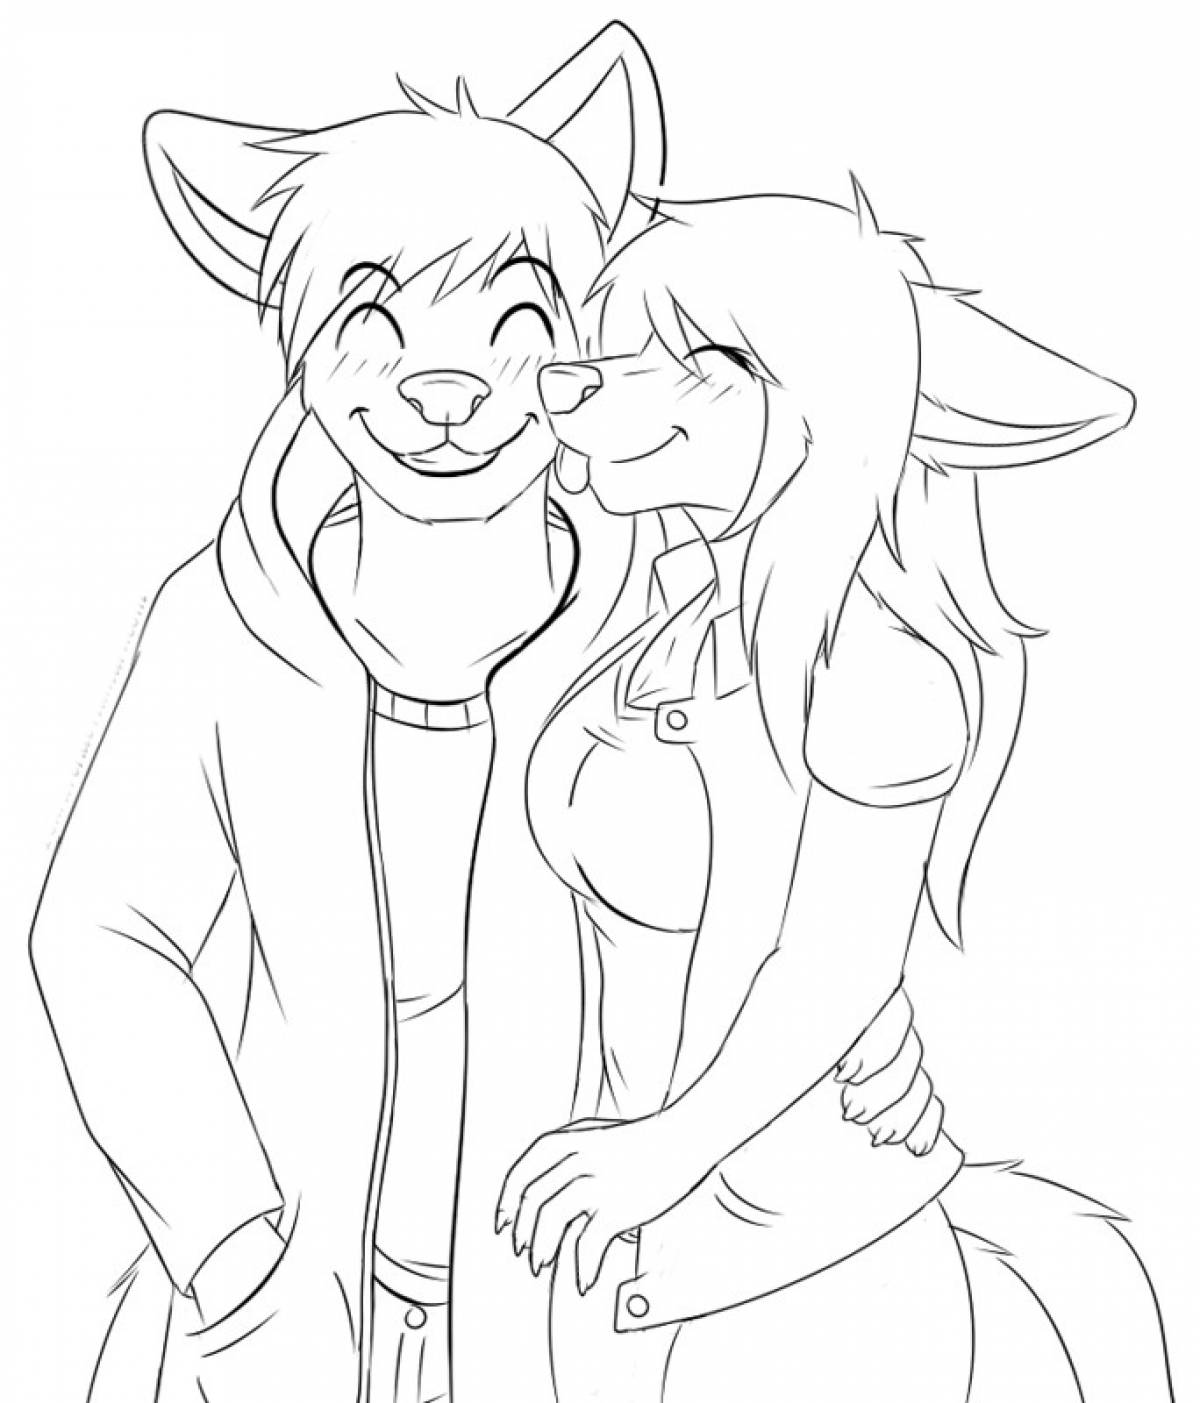 Furry coloring page